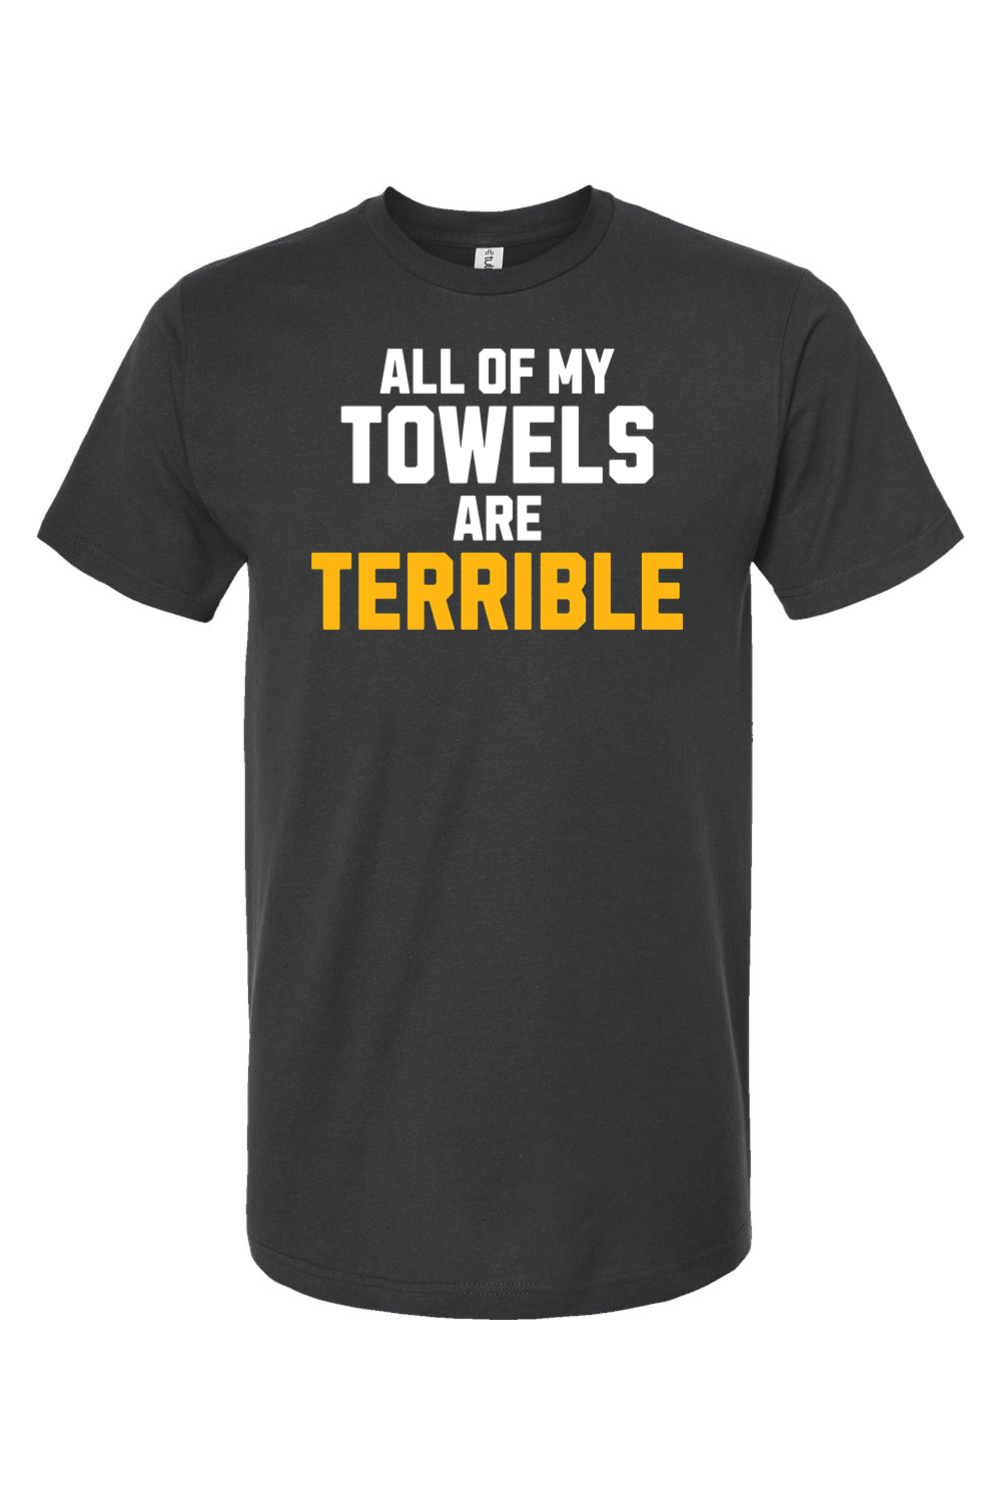 All of My Towels are Terrible - Yinzylvania